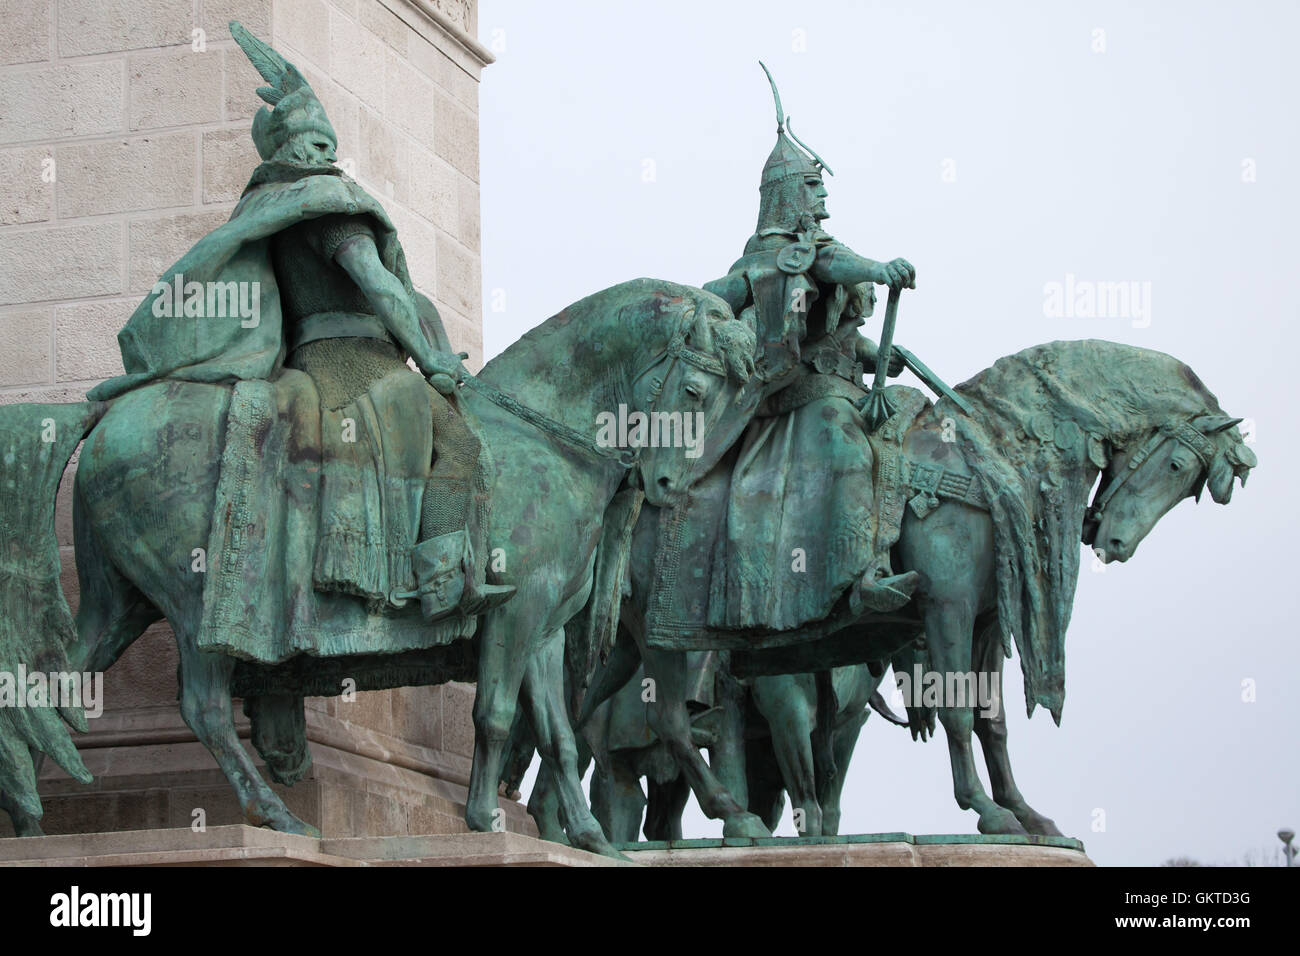 Seven Chieftains of the Magyars leading by Prince Arpad (R). Statues by Hungarian sculptor Gyorgy Zala on the Millennium Monument in the Heroes Square in Budapest, Hungary. Stock Photo